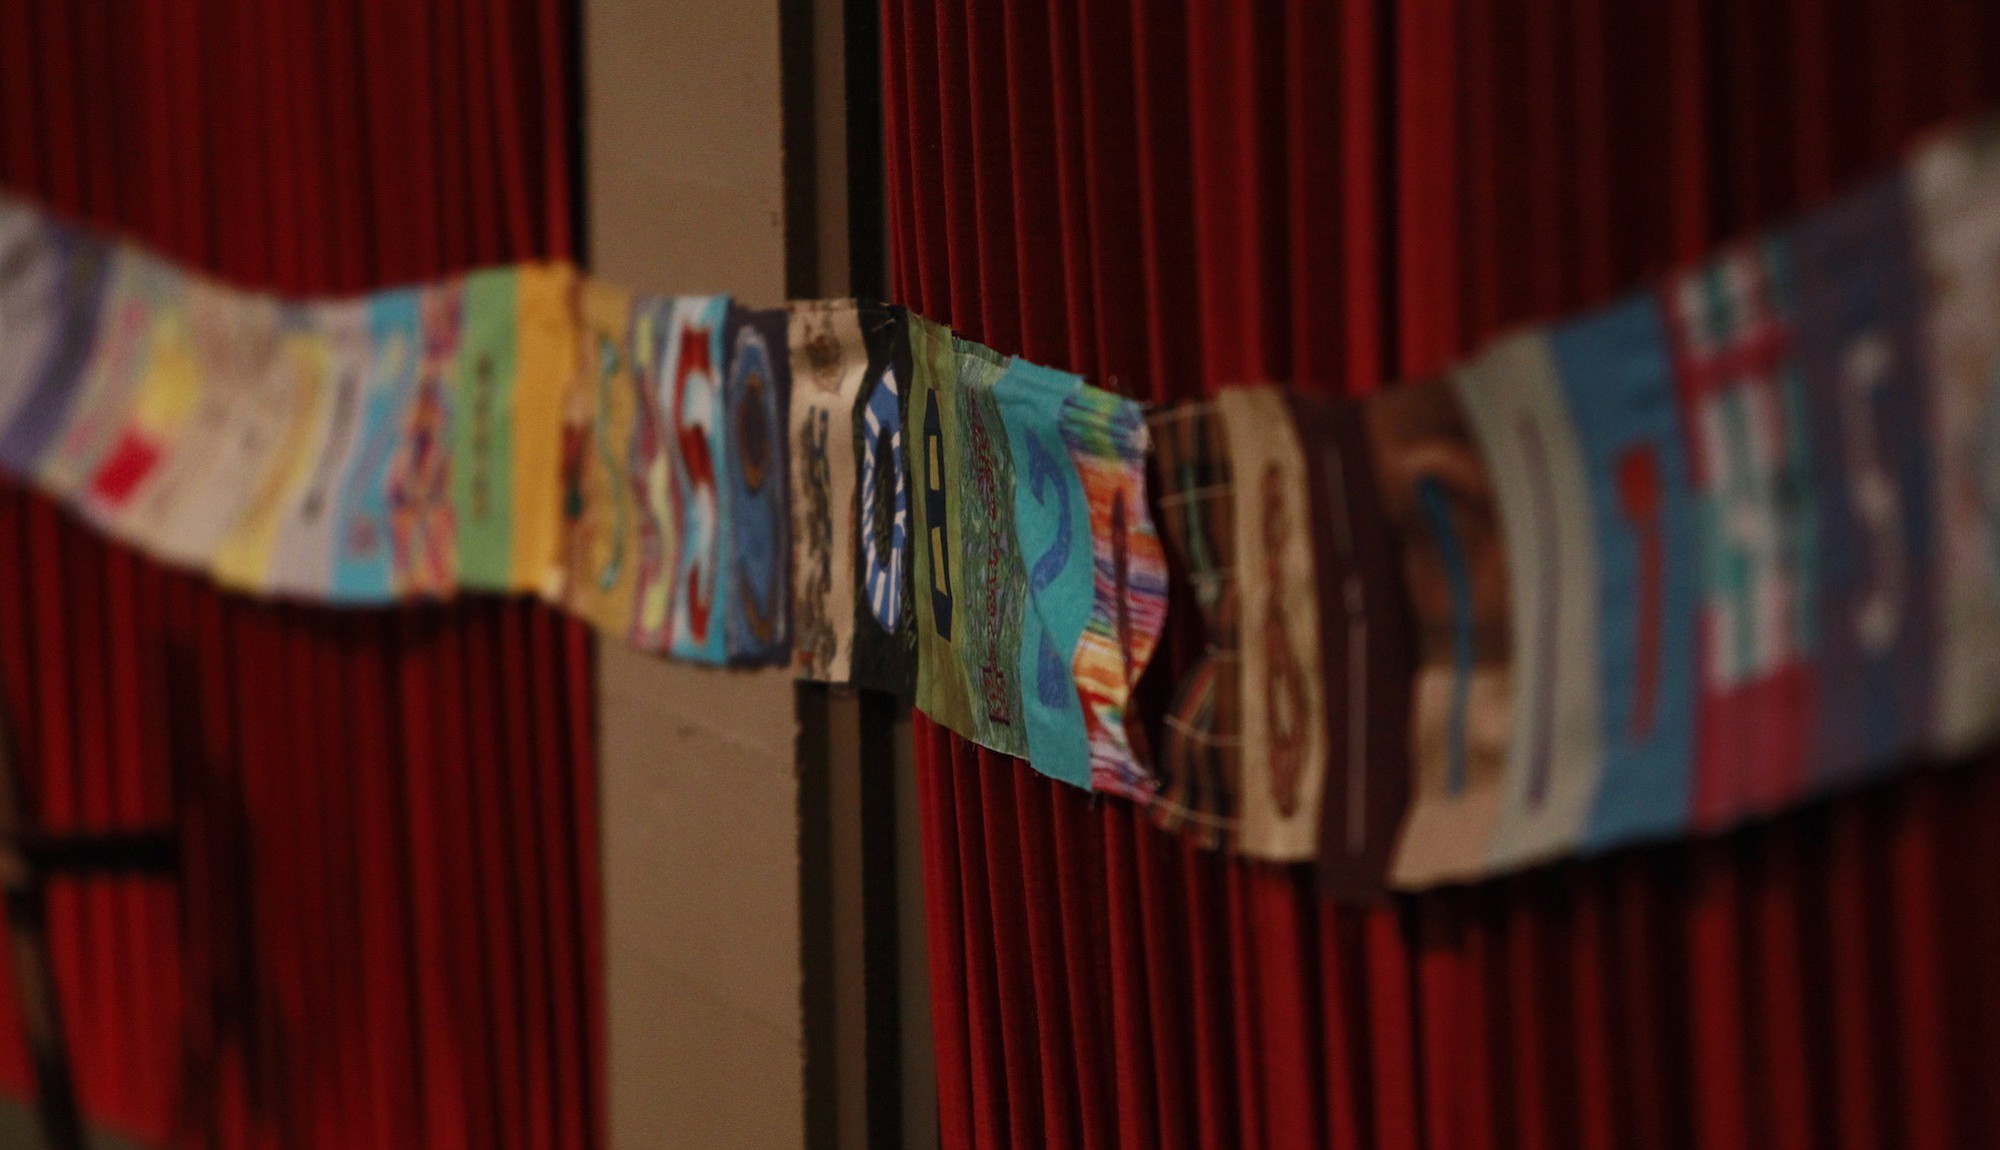 Pi Day volunteers hung a 1/4 mile long banner at Kiggins theater Saturday.